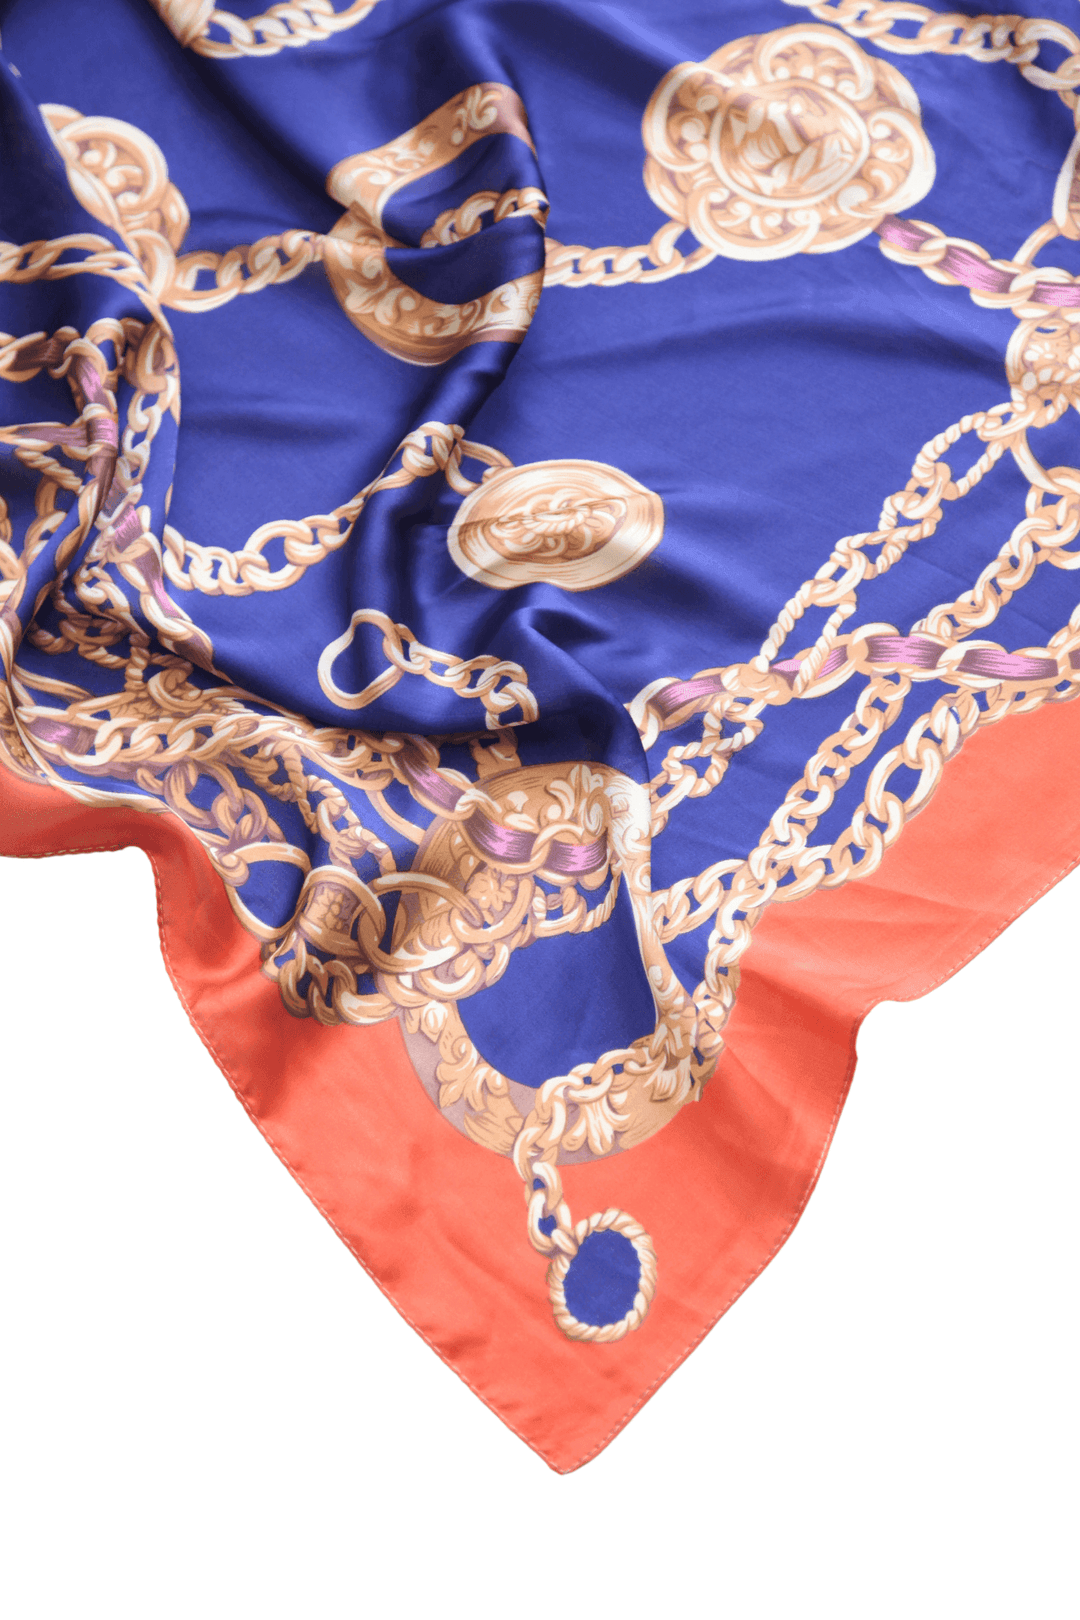 Orange and navy chain silky scarf in Houston